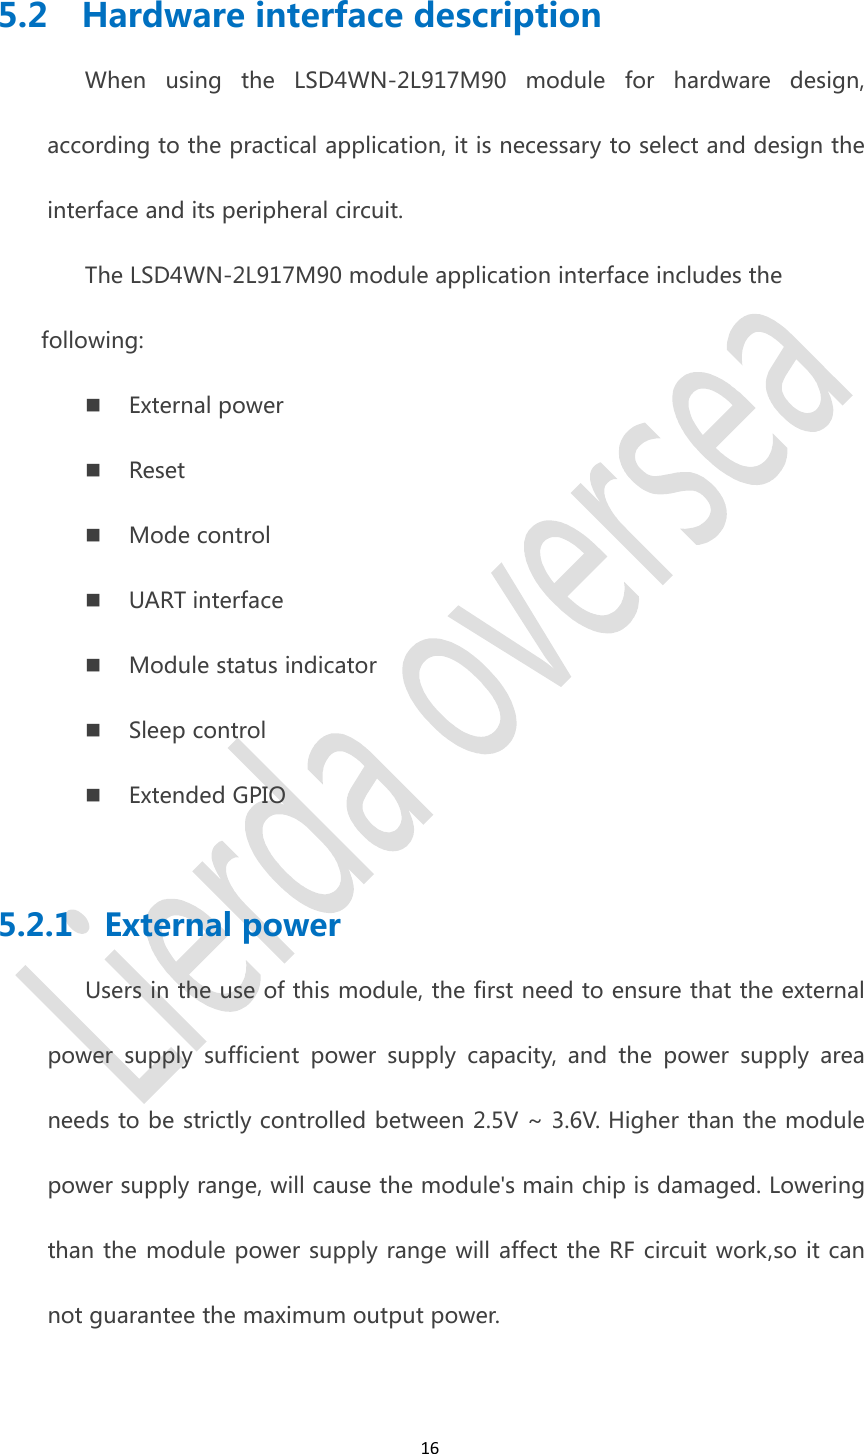 165.2 Hardware interface descriptionWhen using the LSD4WN-2L917M90 module for hardware design,according to the practical application, it is necessary to select and design theinterface and its peripheral circuit.The LSD4WN-2L917M90 module application interface includes thefollowing:External powerResetMode controlUART interfaceModule status indicatorSleep controlExtended GPIO5.2.1 External powerUsers in the use of this module, the first need to ensure that the externalpower supply sufficient power supply capacity, and the power supply areaneeds to be strictly controlled between 2.5V ~ 3.6V. Higher than the modulepower supply range, will cause the module&apos;s main chip is damaged. Loweringthan the module power supply range will affect the RF circuit work,so it cannot guarantee the maximum output power.